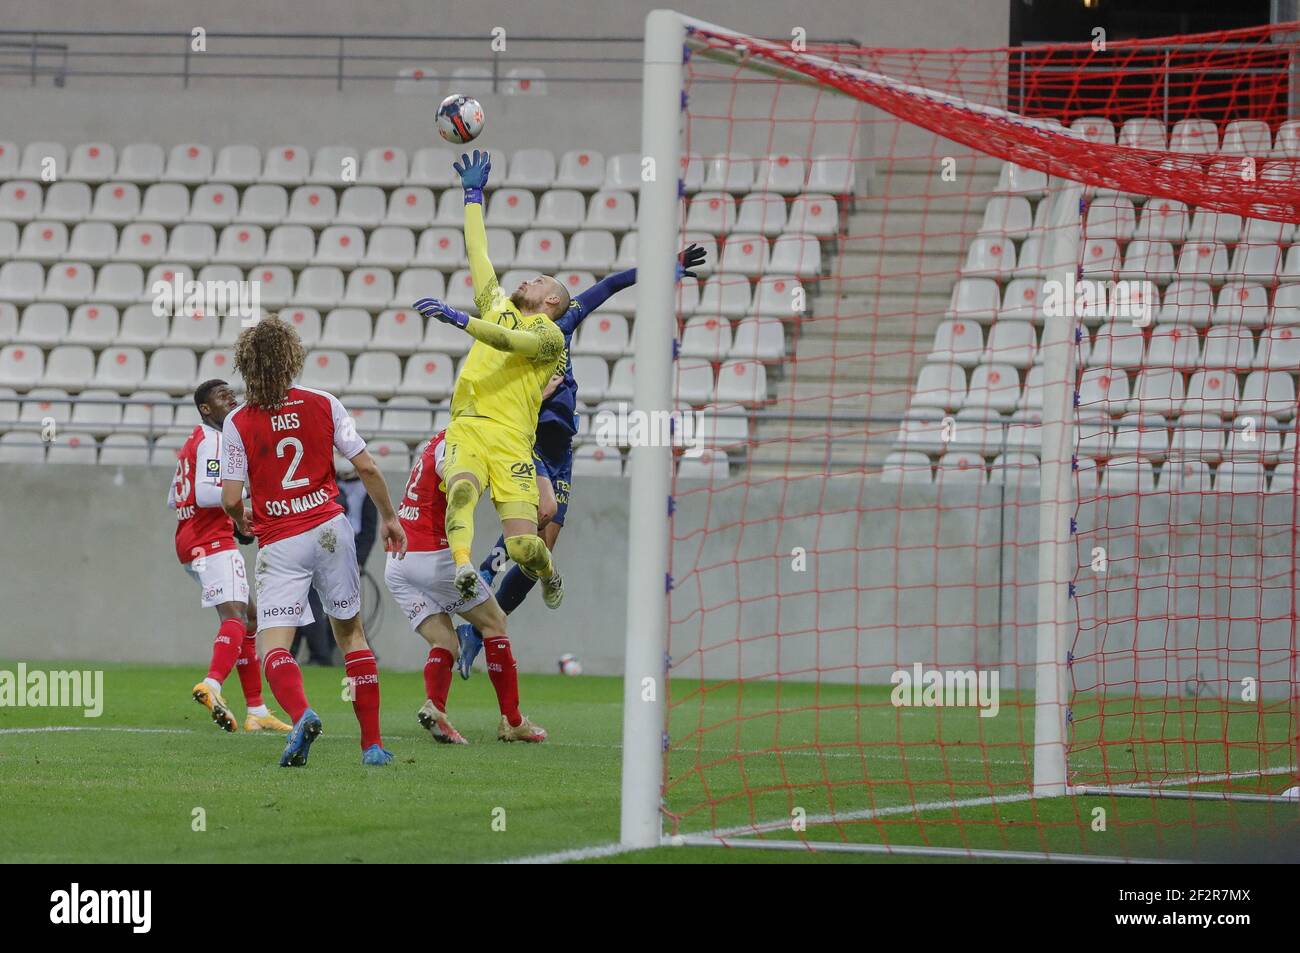 Predrag RAJKOVIC Goal Keeper of Reims in action during the Ligue 1 Reims v Olympique Lyonnais (OL) football match at Auguste Delaune stadium, on March 12 in Reims, France. Photo by Loic Baratoux/ABACAPRESS.COM Stock Photo